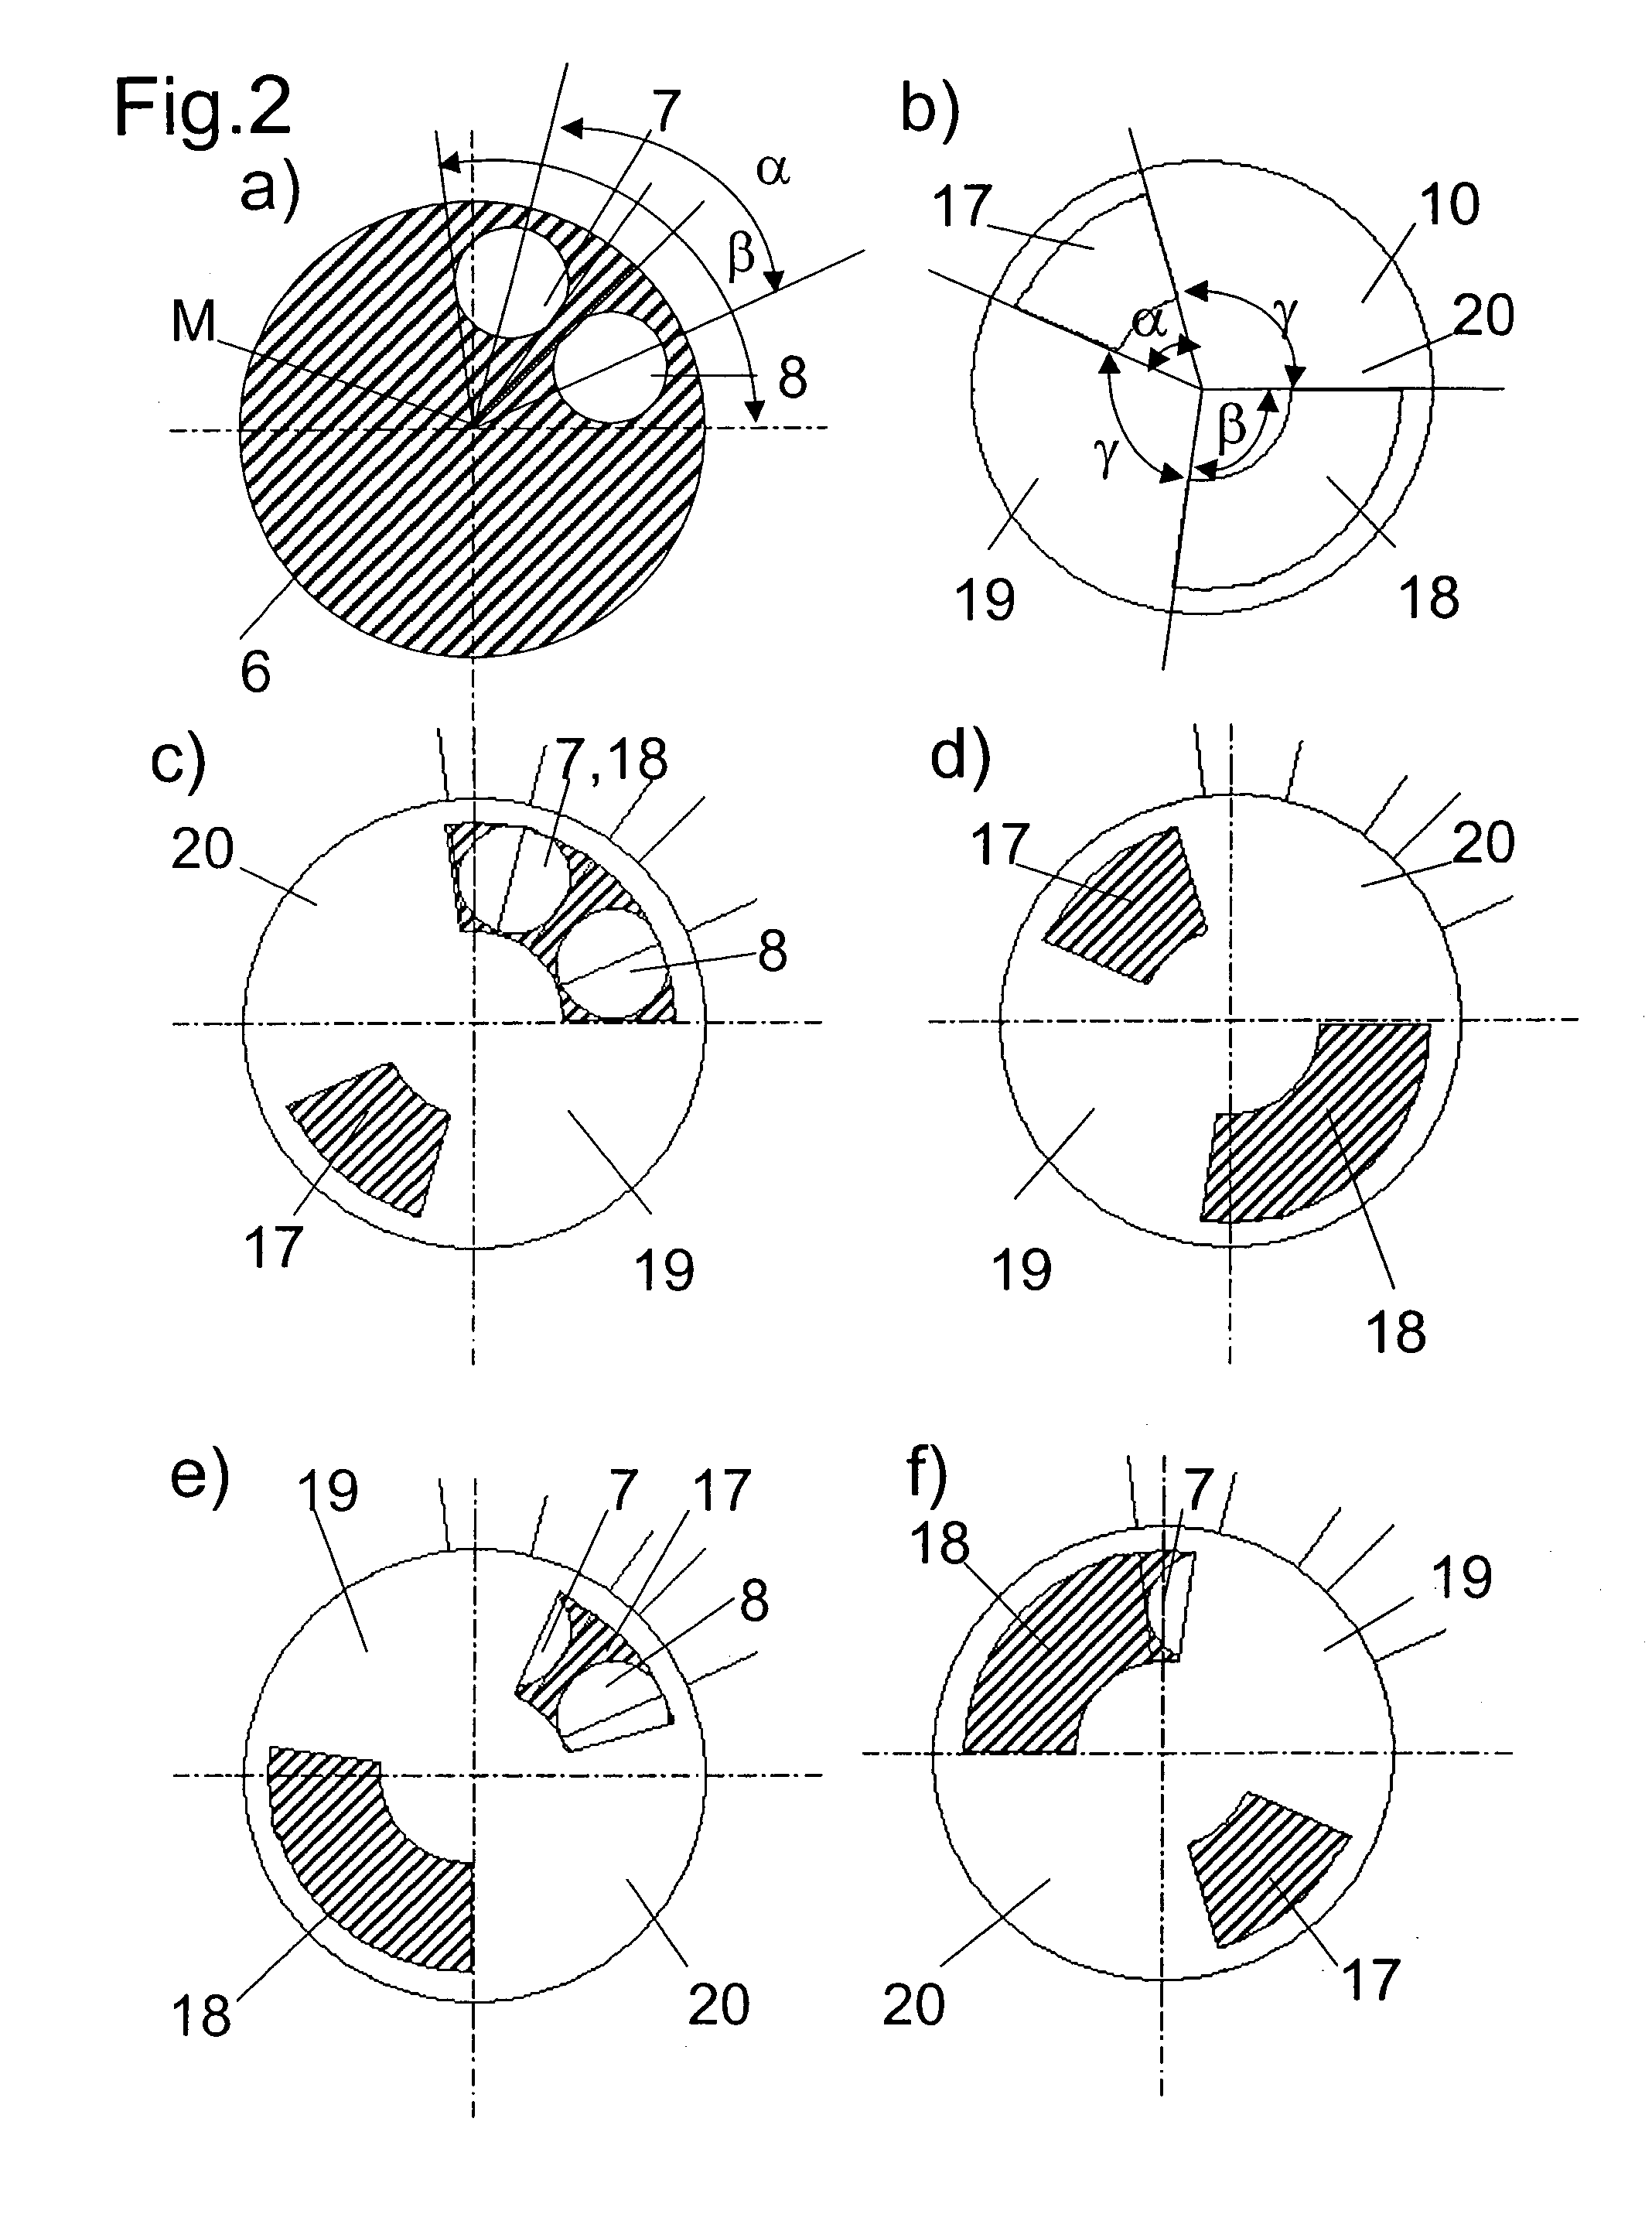 Adjustable two-way valve device for a combustion engine